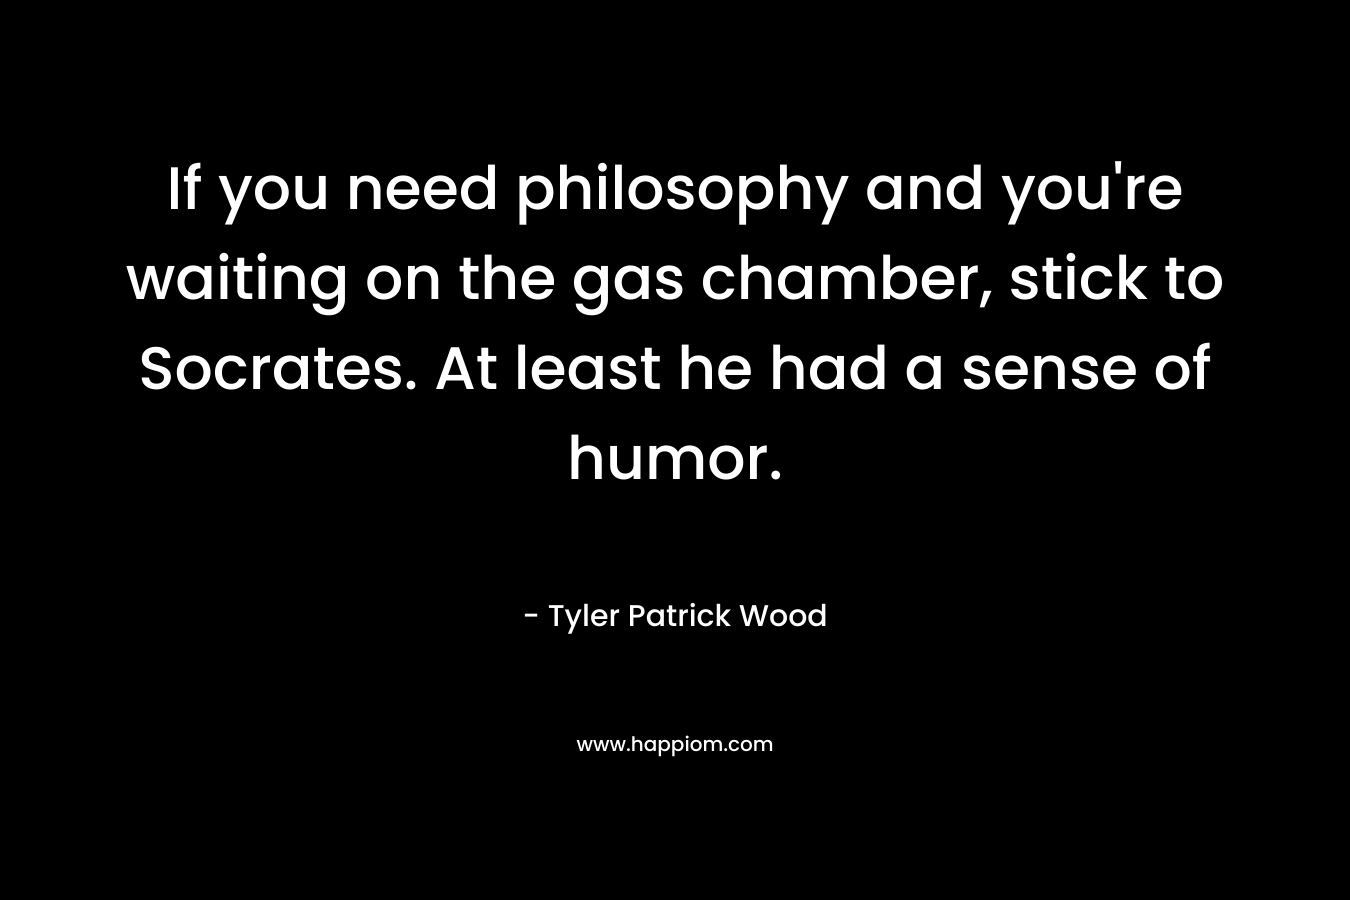 If you need philosophy and you're waiting on the gas chamber, stick to Socrates. At least he had a sense of humor.